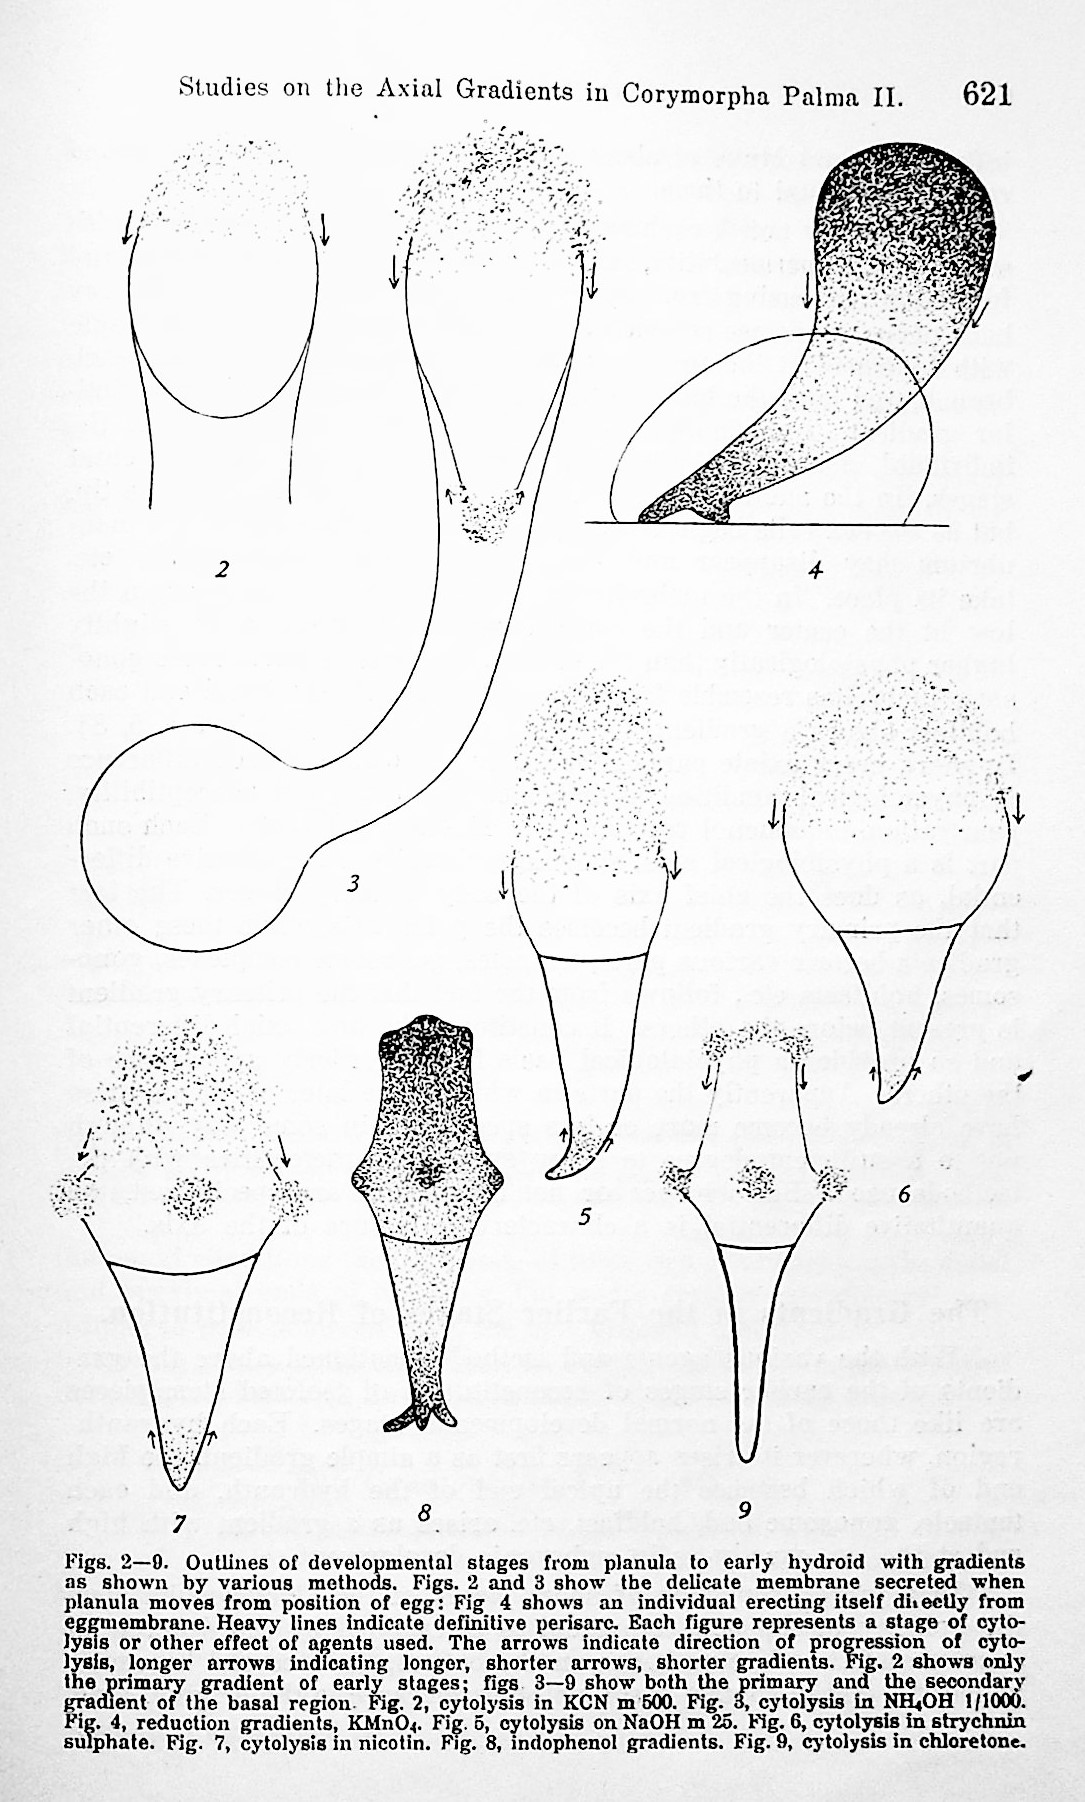 Image for Studies on the axial gradients in Corymorpha palma. I. Respiratory, electric and reconstitutional gradients (authored with L. H. Hyman) TOGETHER WITH Studies on the axial gradients in Corymorpha palma. II. Differential susceptibility, penetration and oxidation-reduction in development and reconstitution TOGETHER WITH Studies on the axial gradients in Corymorpha palma. III. Control and modification of polarity and symmetry in reconstitution by differential exposure